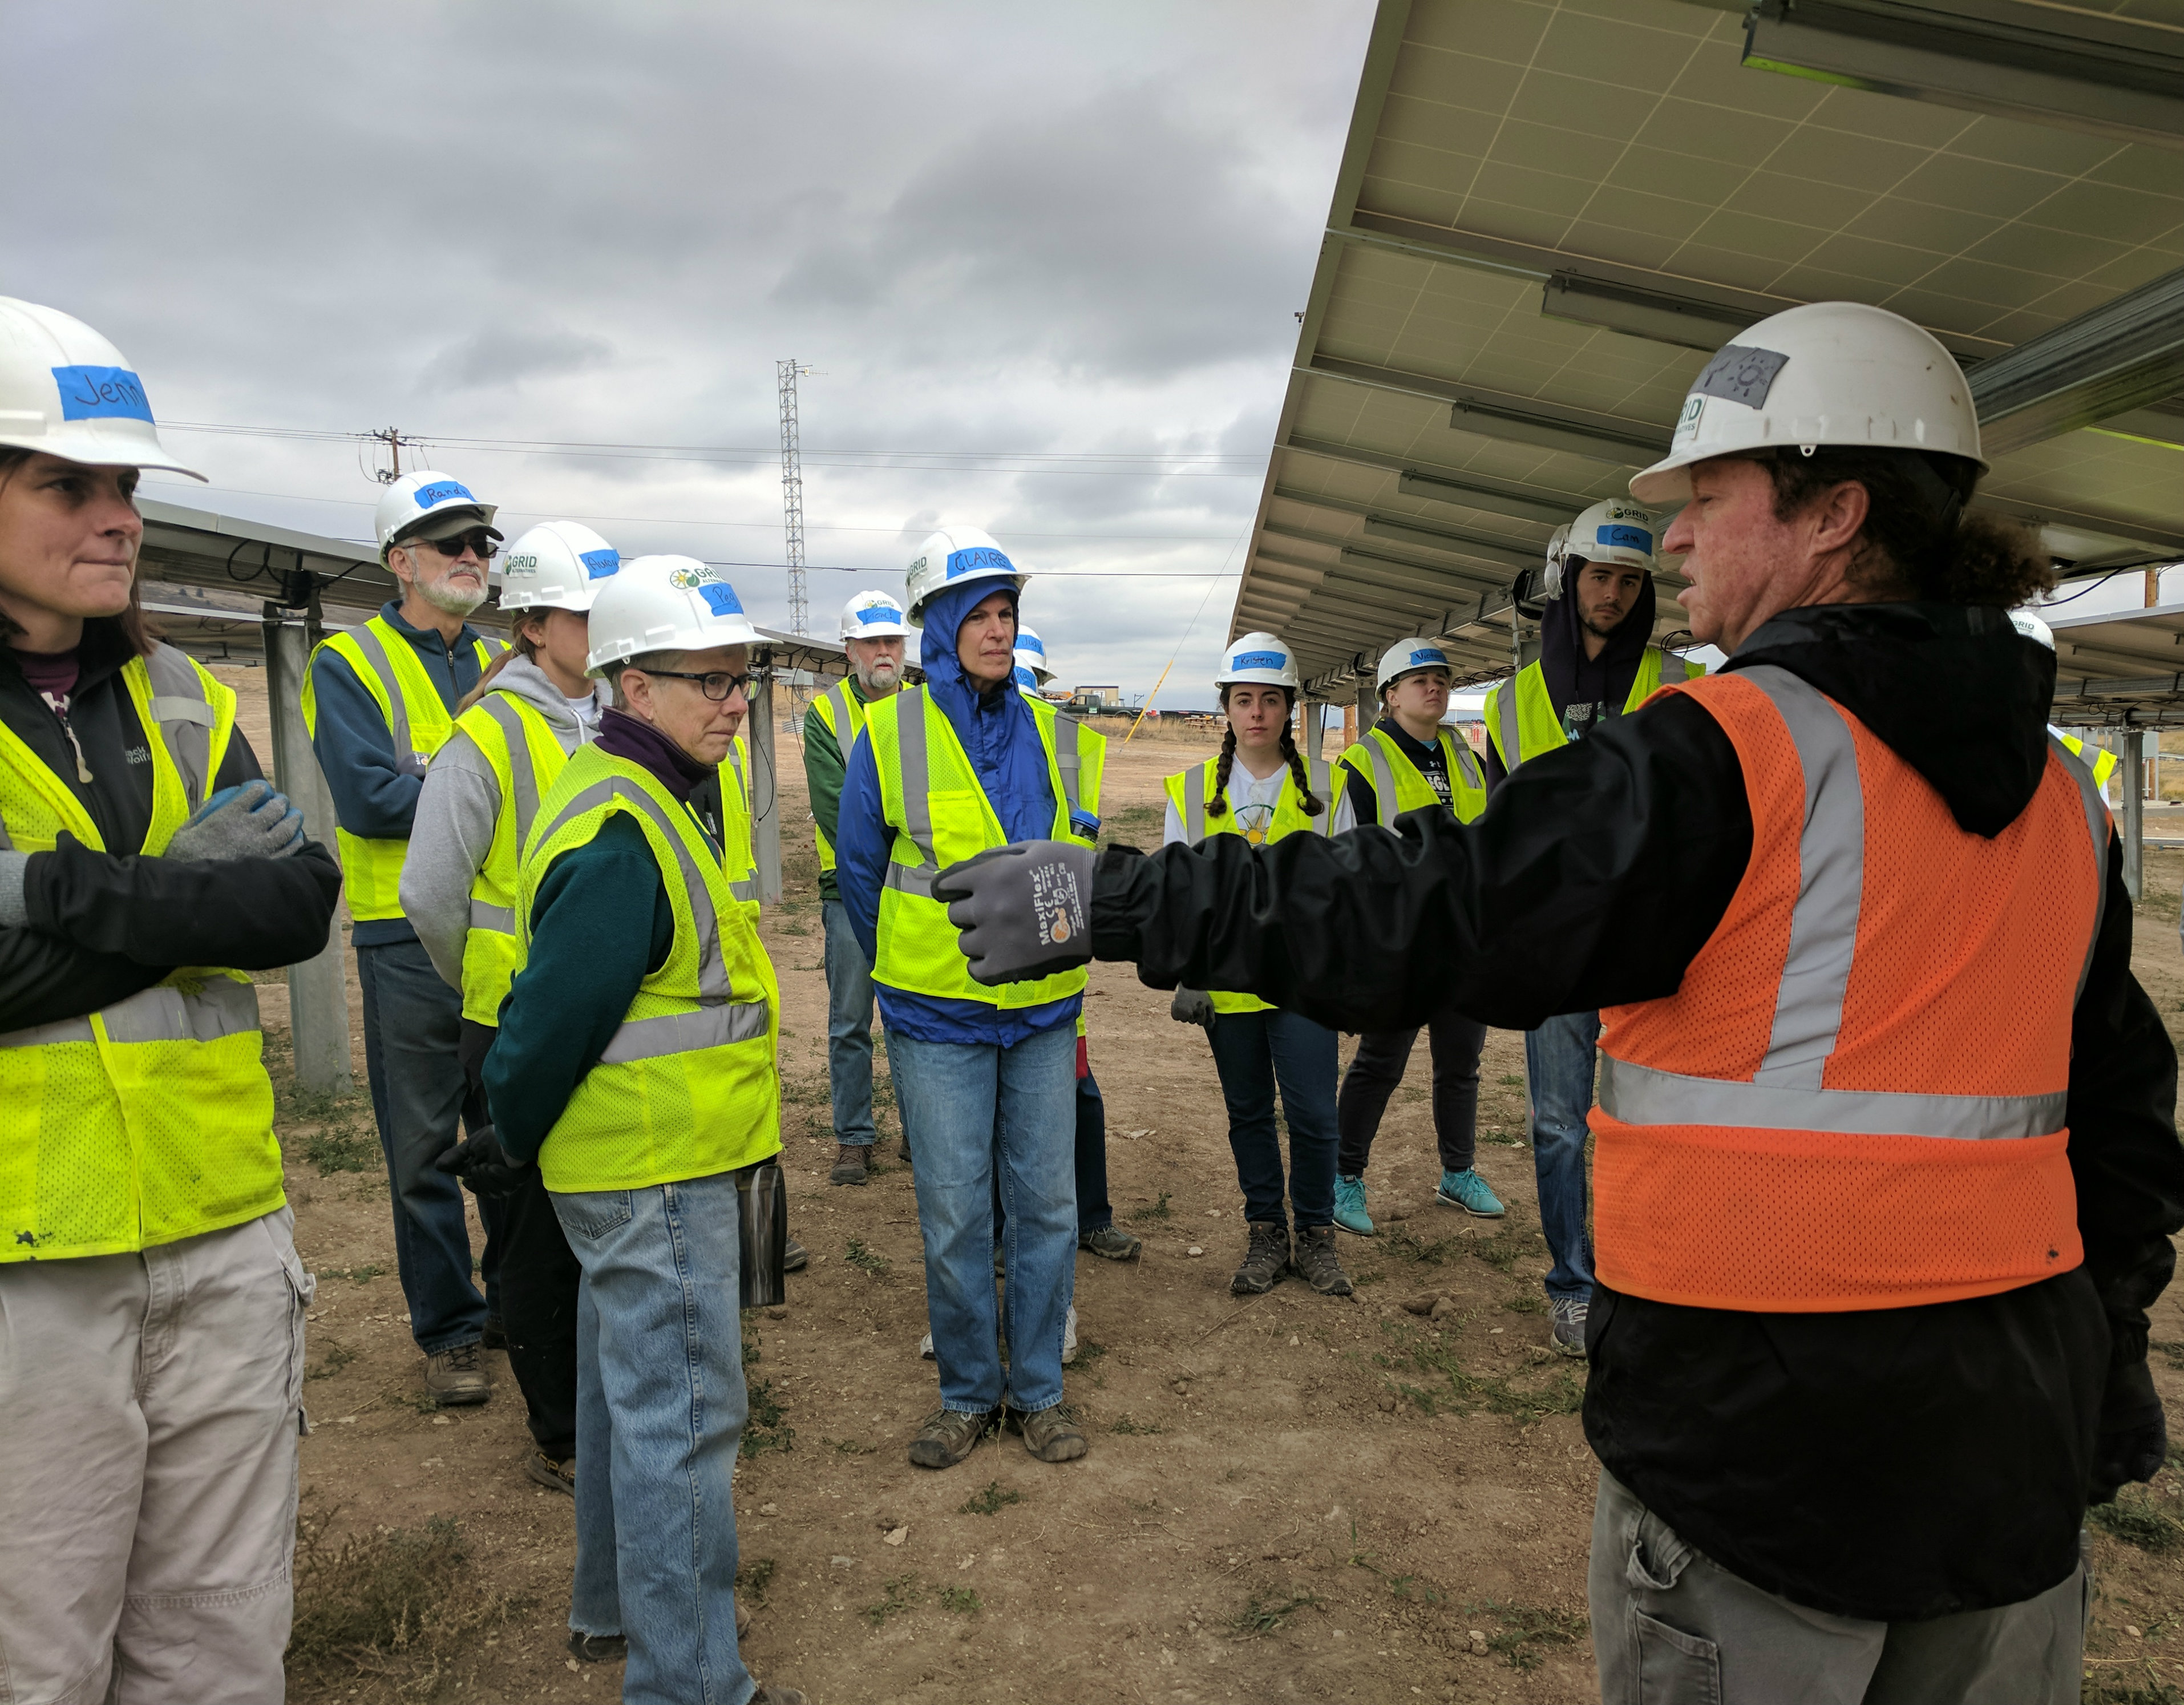 Colorado School of Mines students among the volunteers at a Grid Alternatives build day in Fort Collins